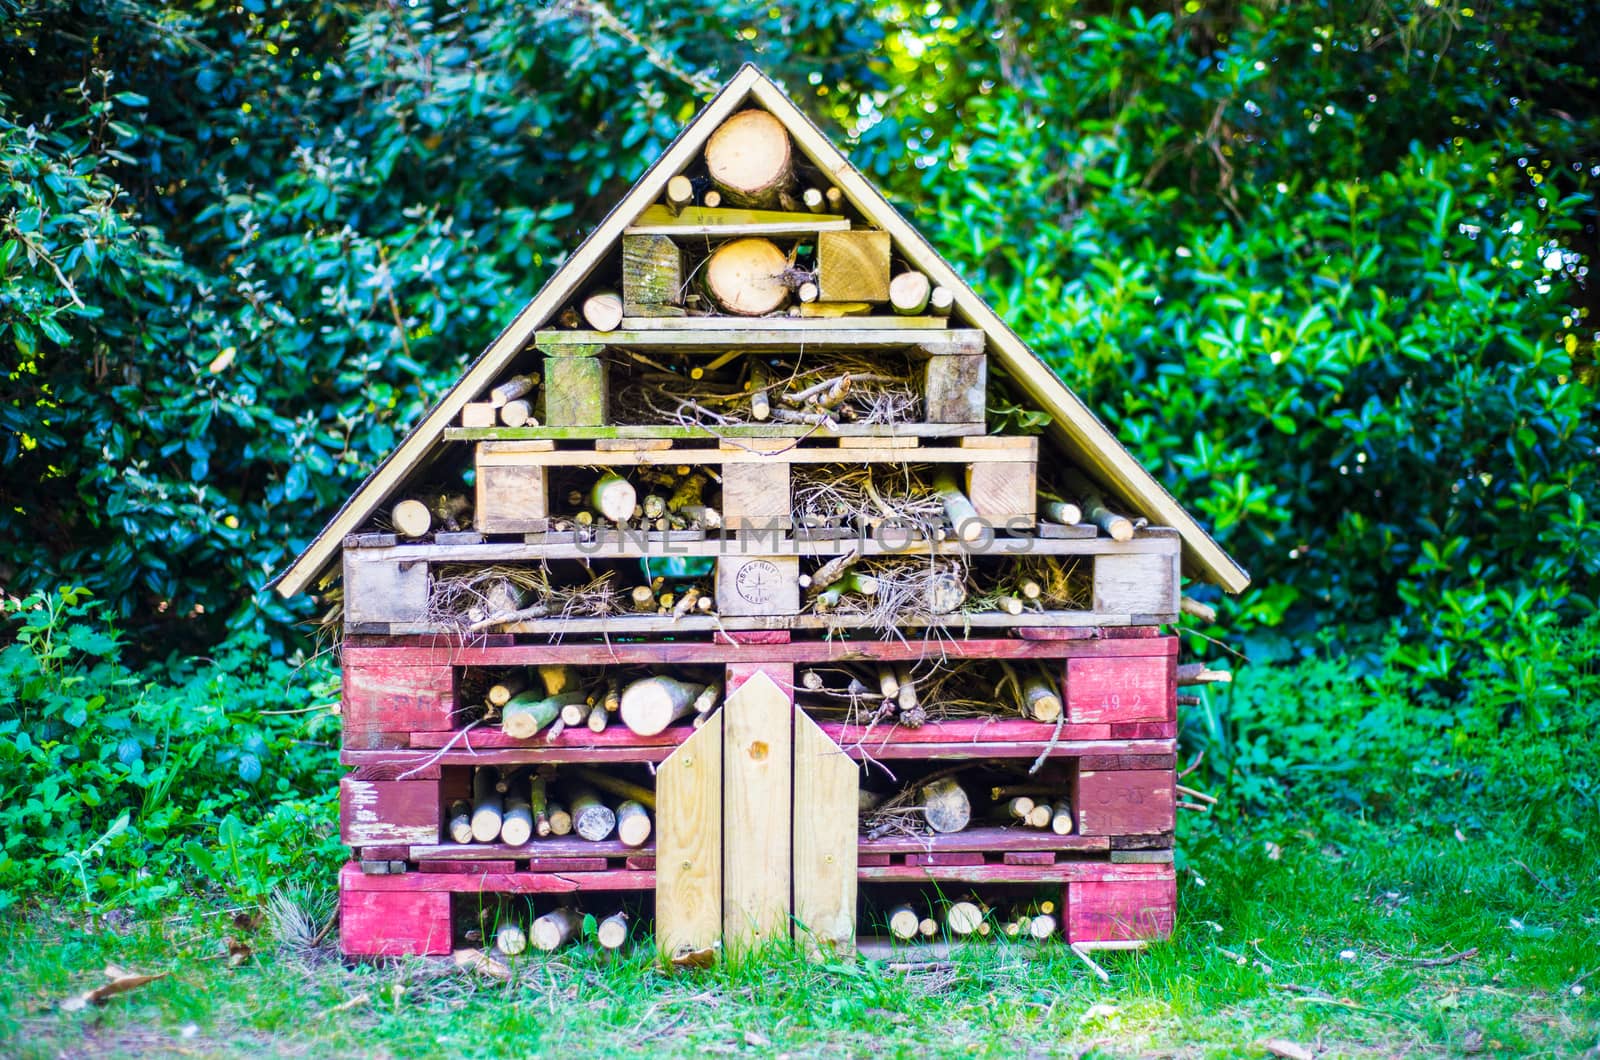 insect hotel decorative wood house with compartments by paddythegolfer